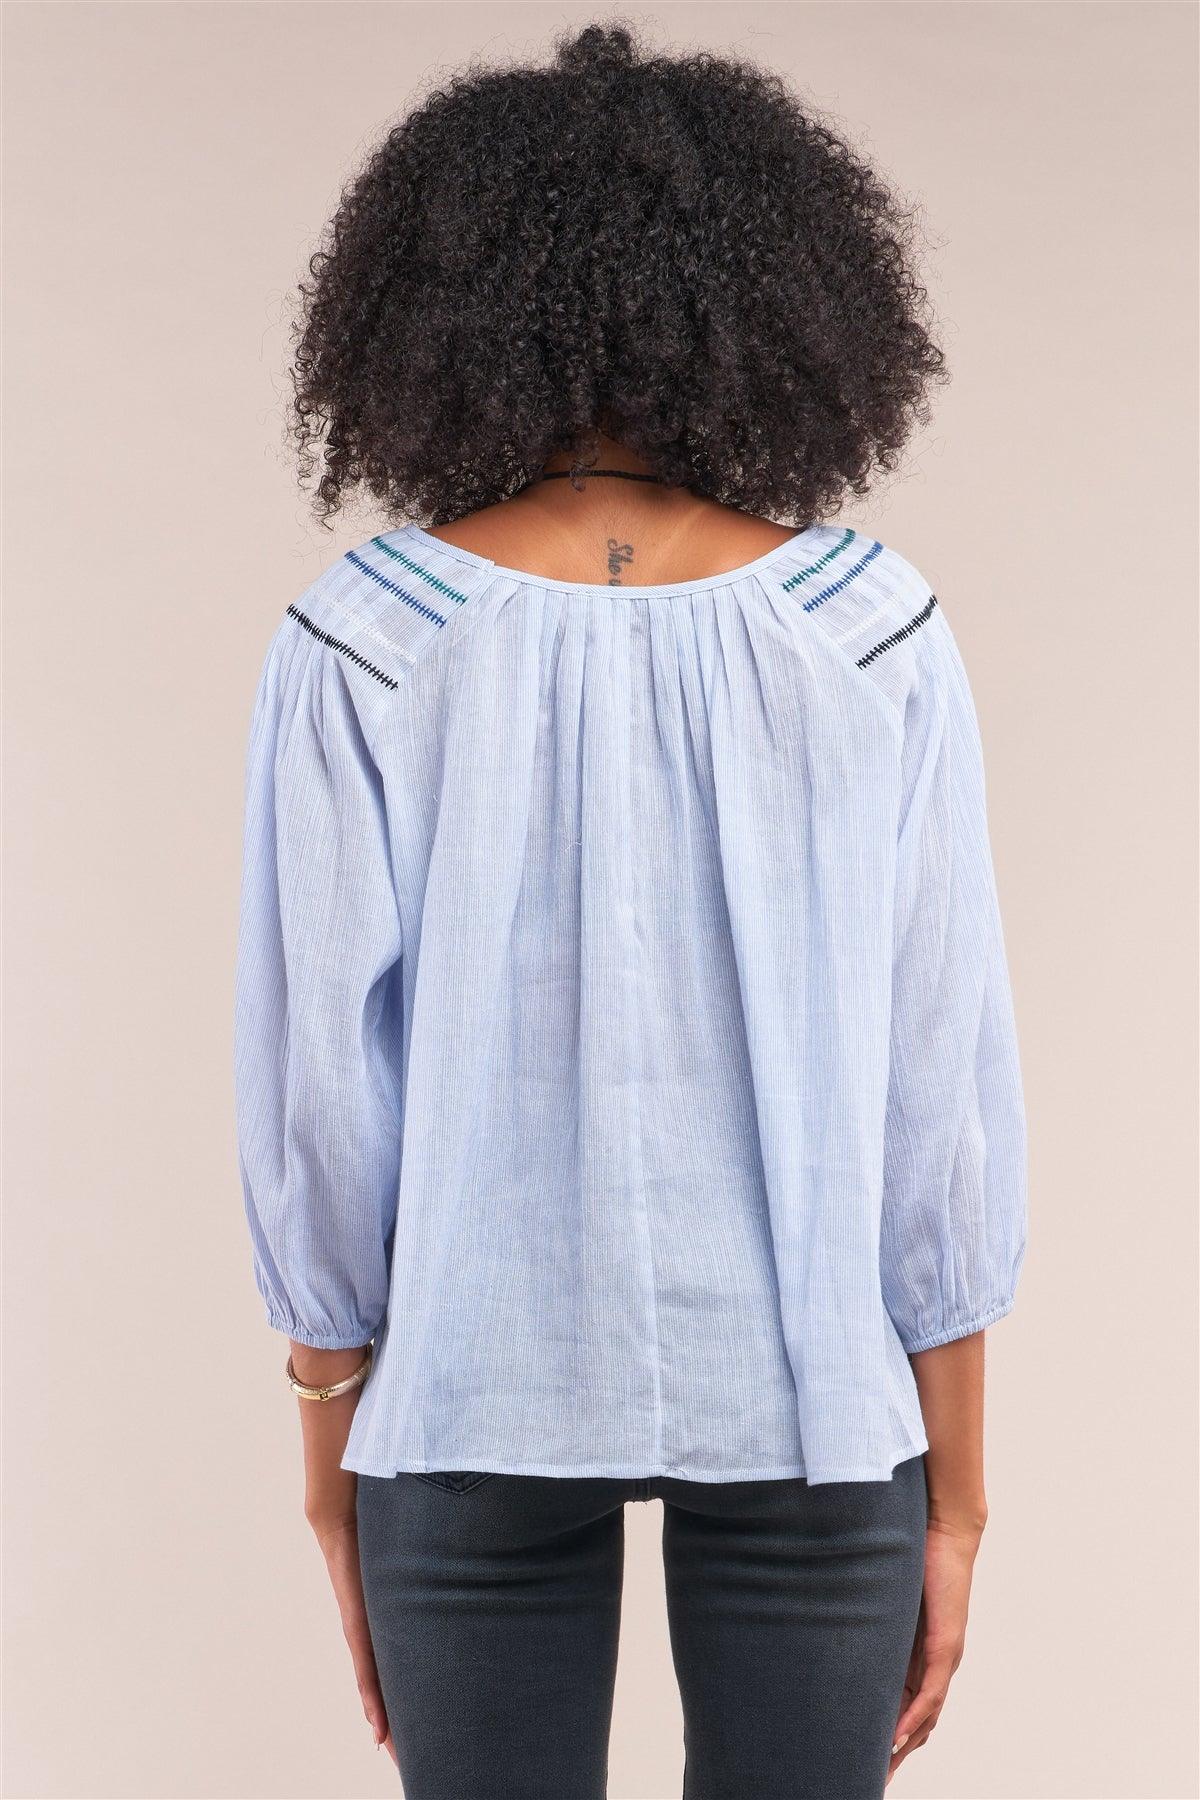 Denim Blue Striped Embroidery Trim Crew Neck Loose Fit Balloon Sleeve Blouse /1-2-2-1